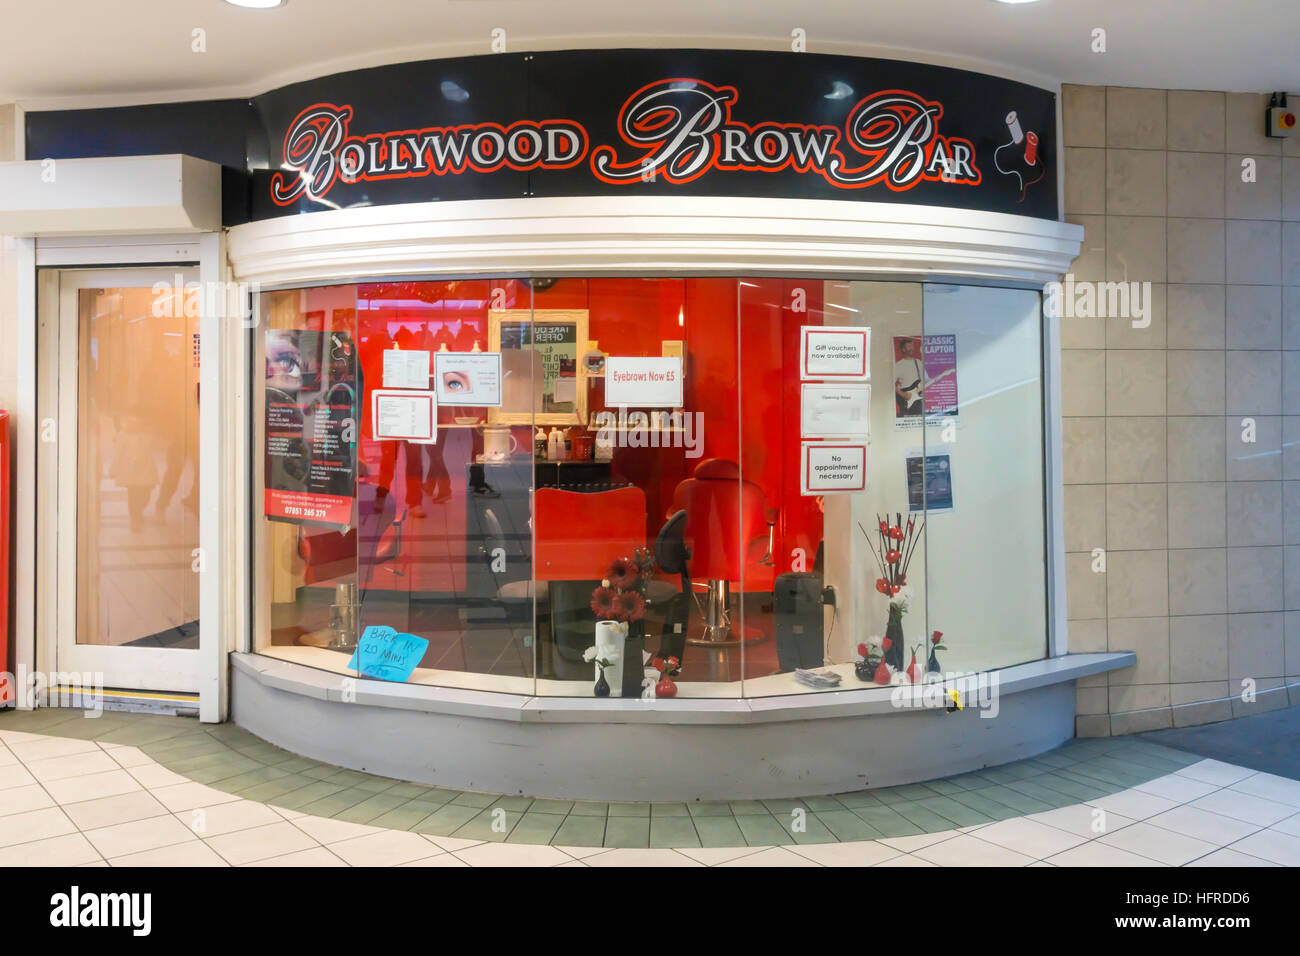 A beauty shop called Bollywood Brow Bar, specialising in beautifying eyeybrows. Stock Photo